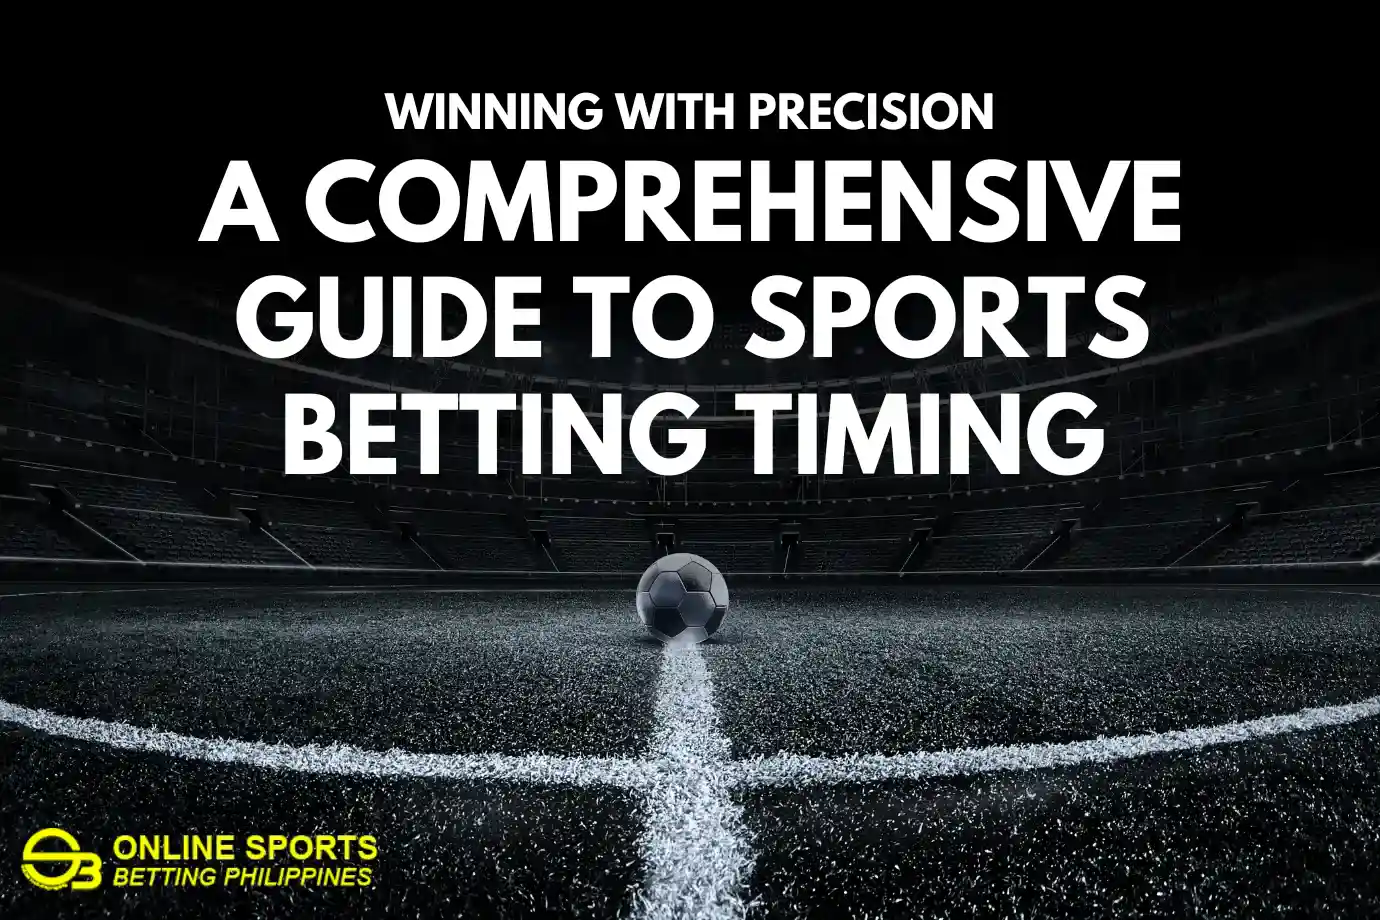 Winning With Precision: A Comprehensive Guide to Sports Betting Timing